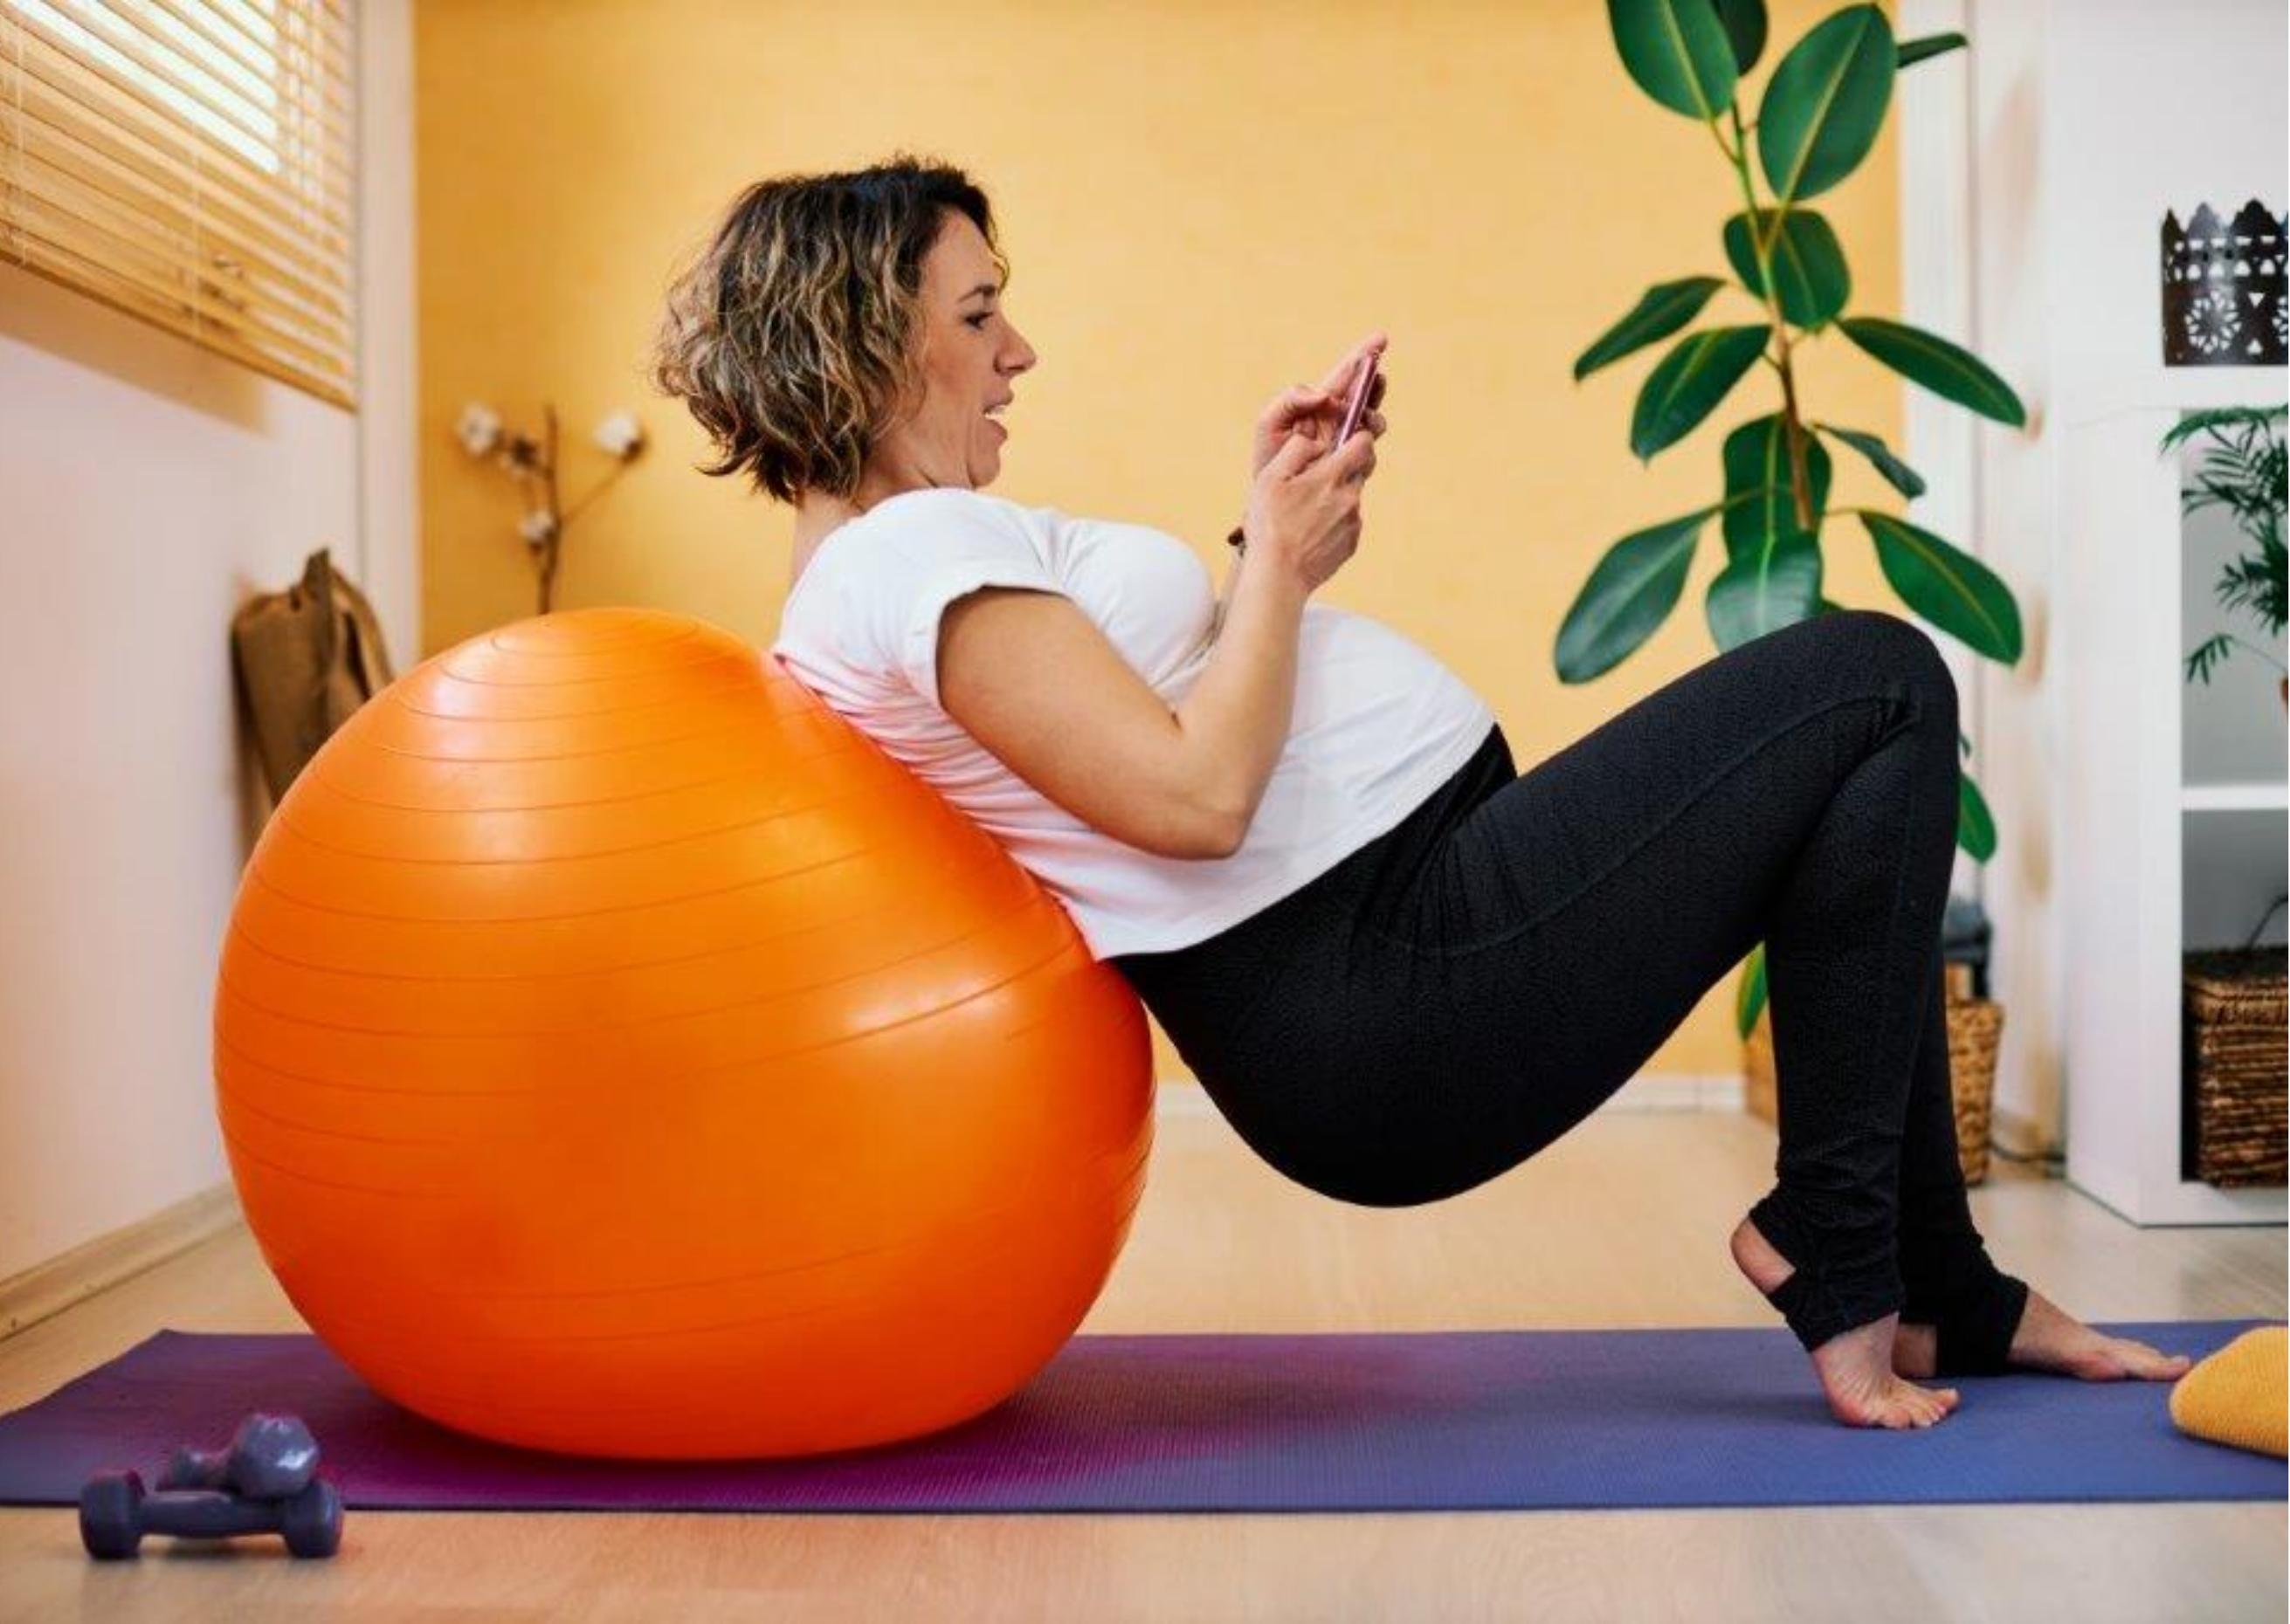 Can a Birth Ball Really Help You Have a Better Labor & Delivery?